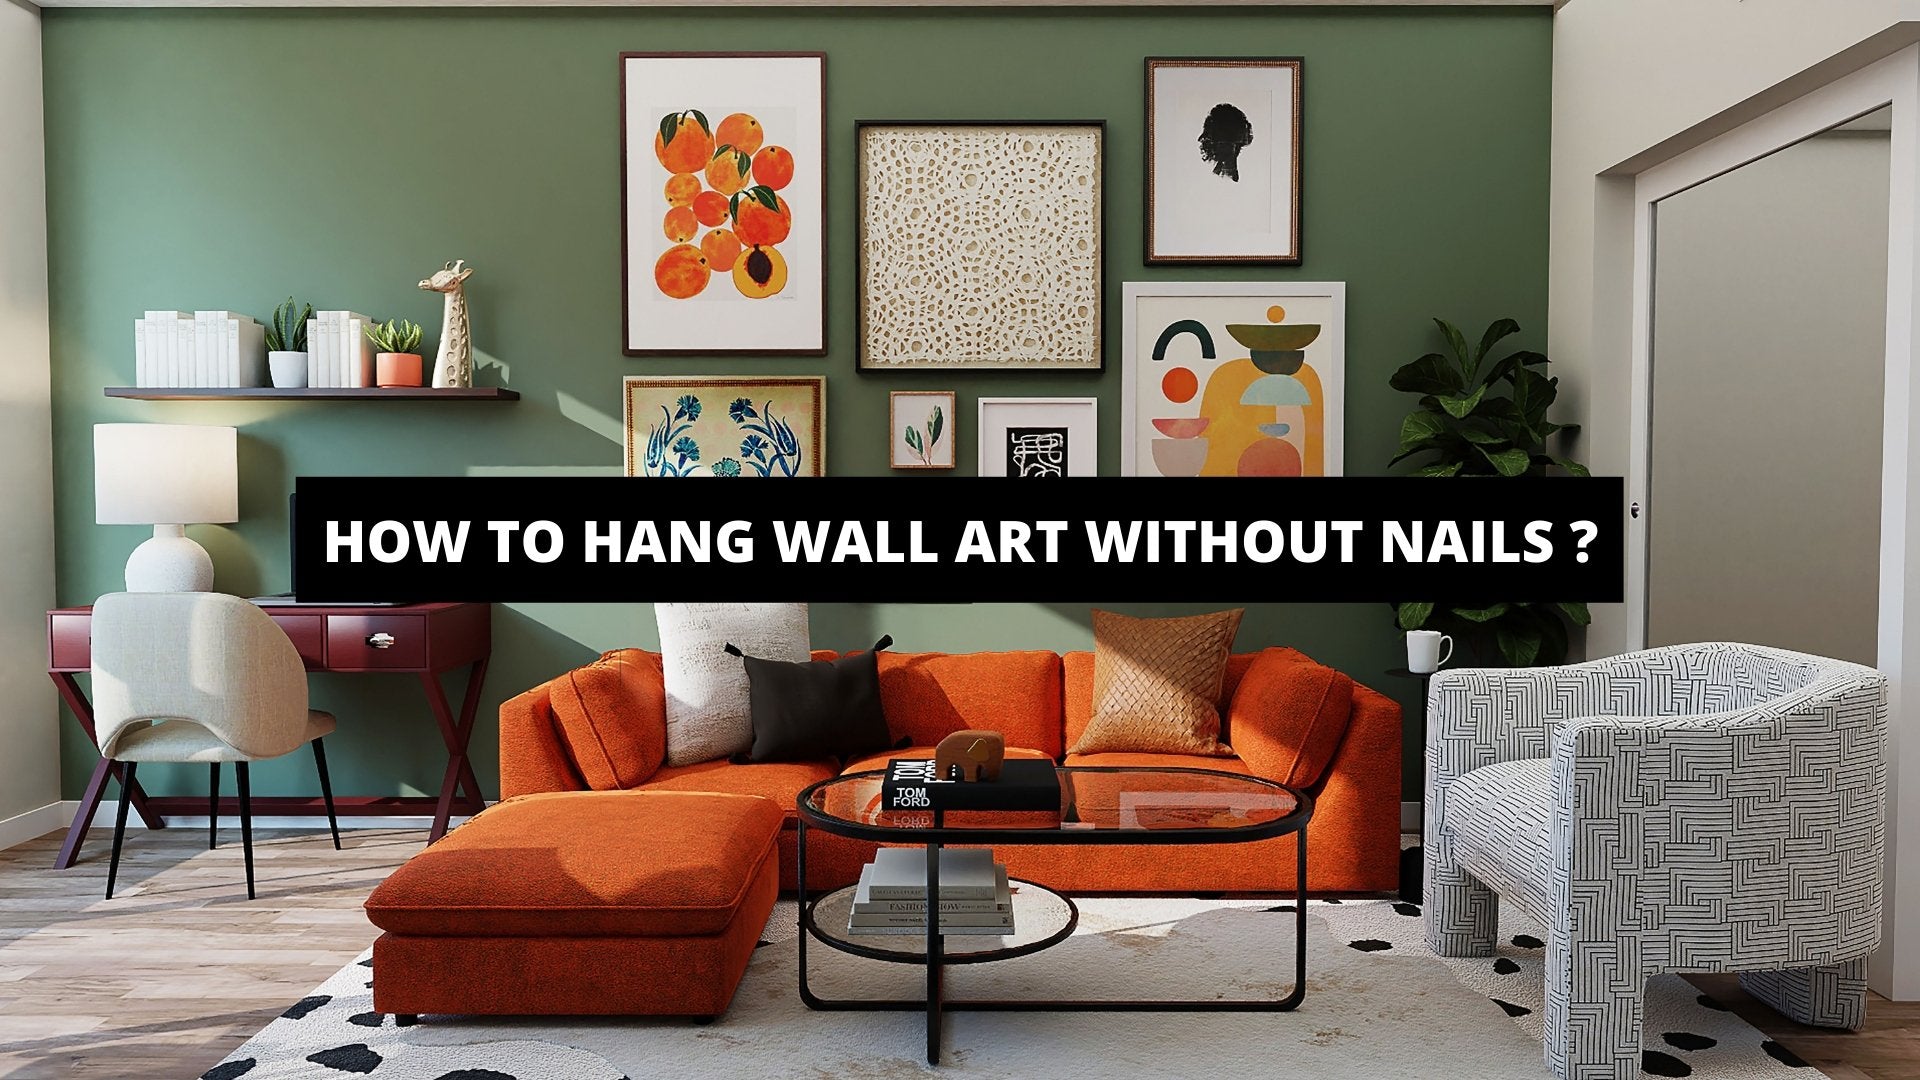 how to hang wall art without nails